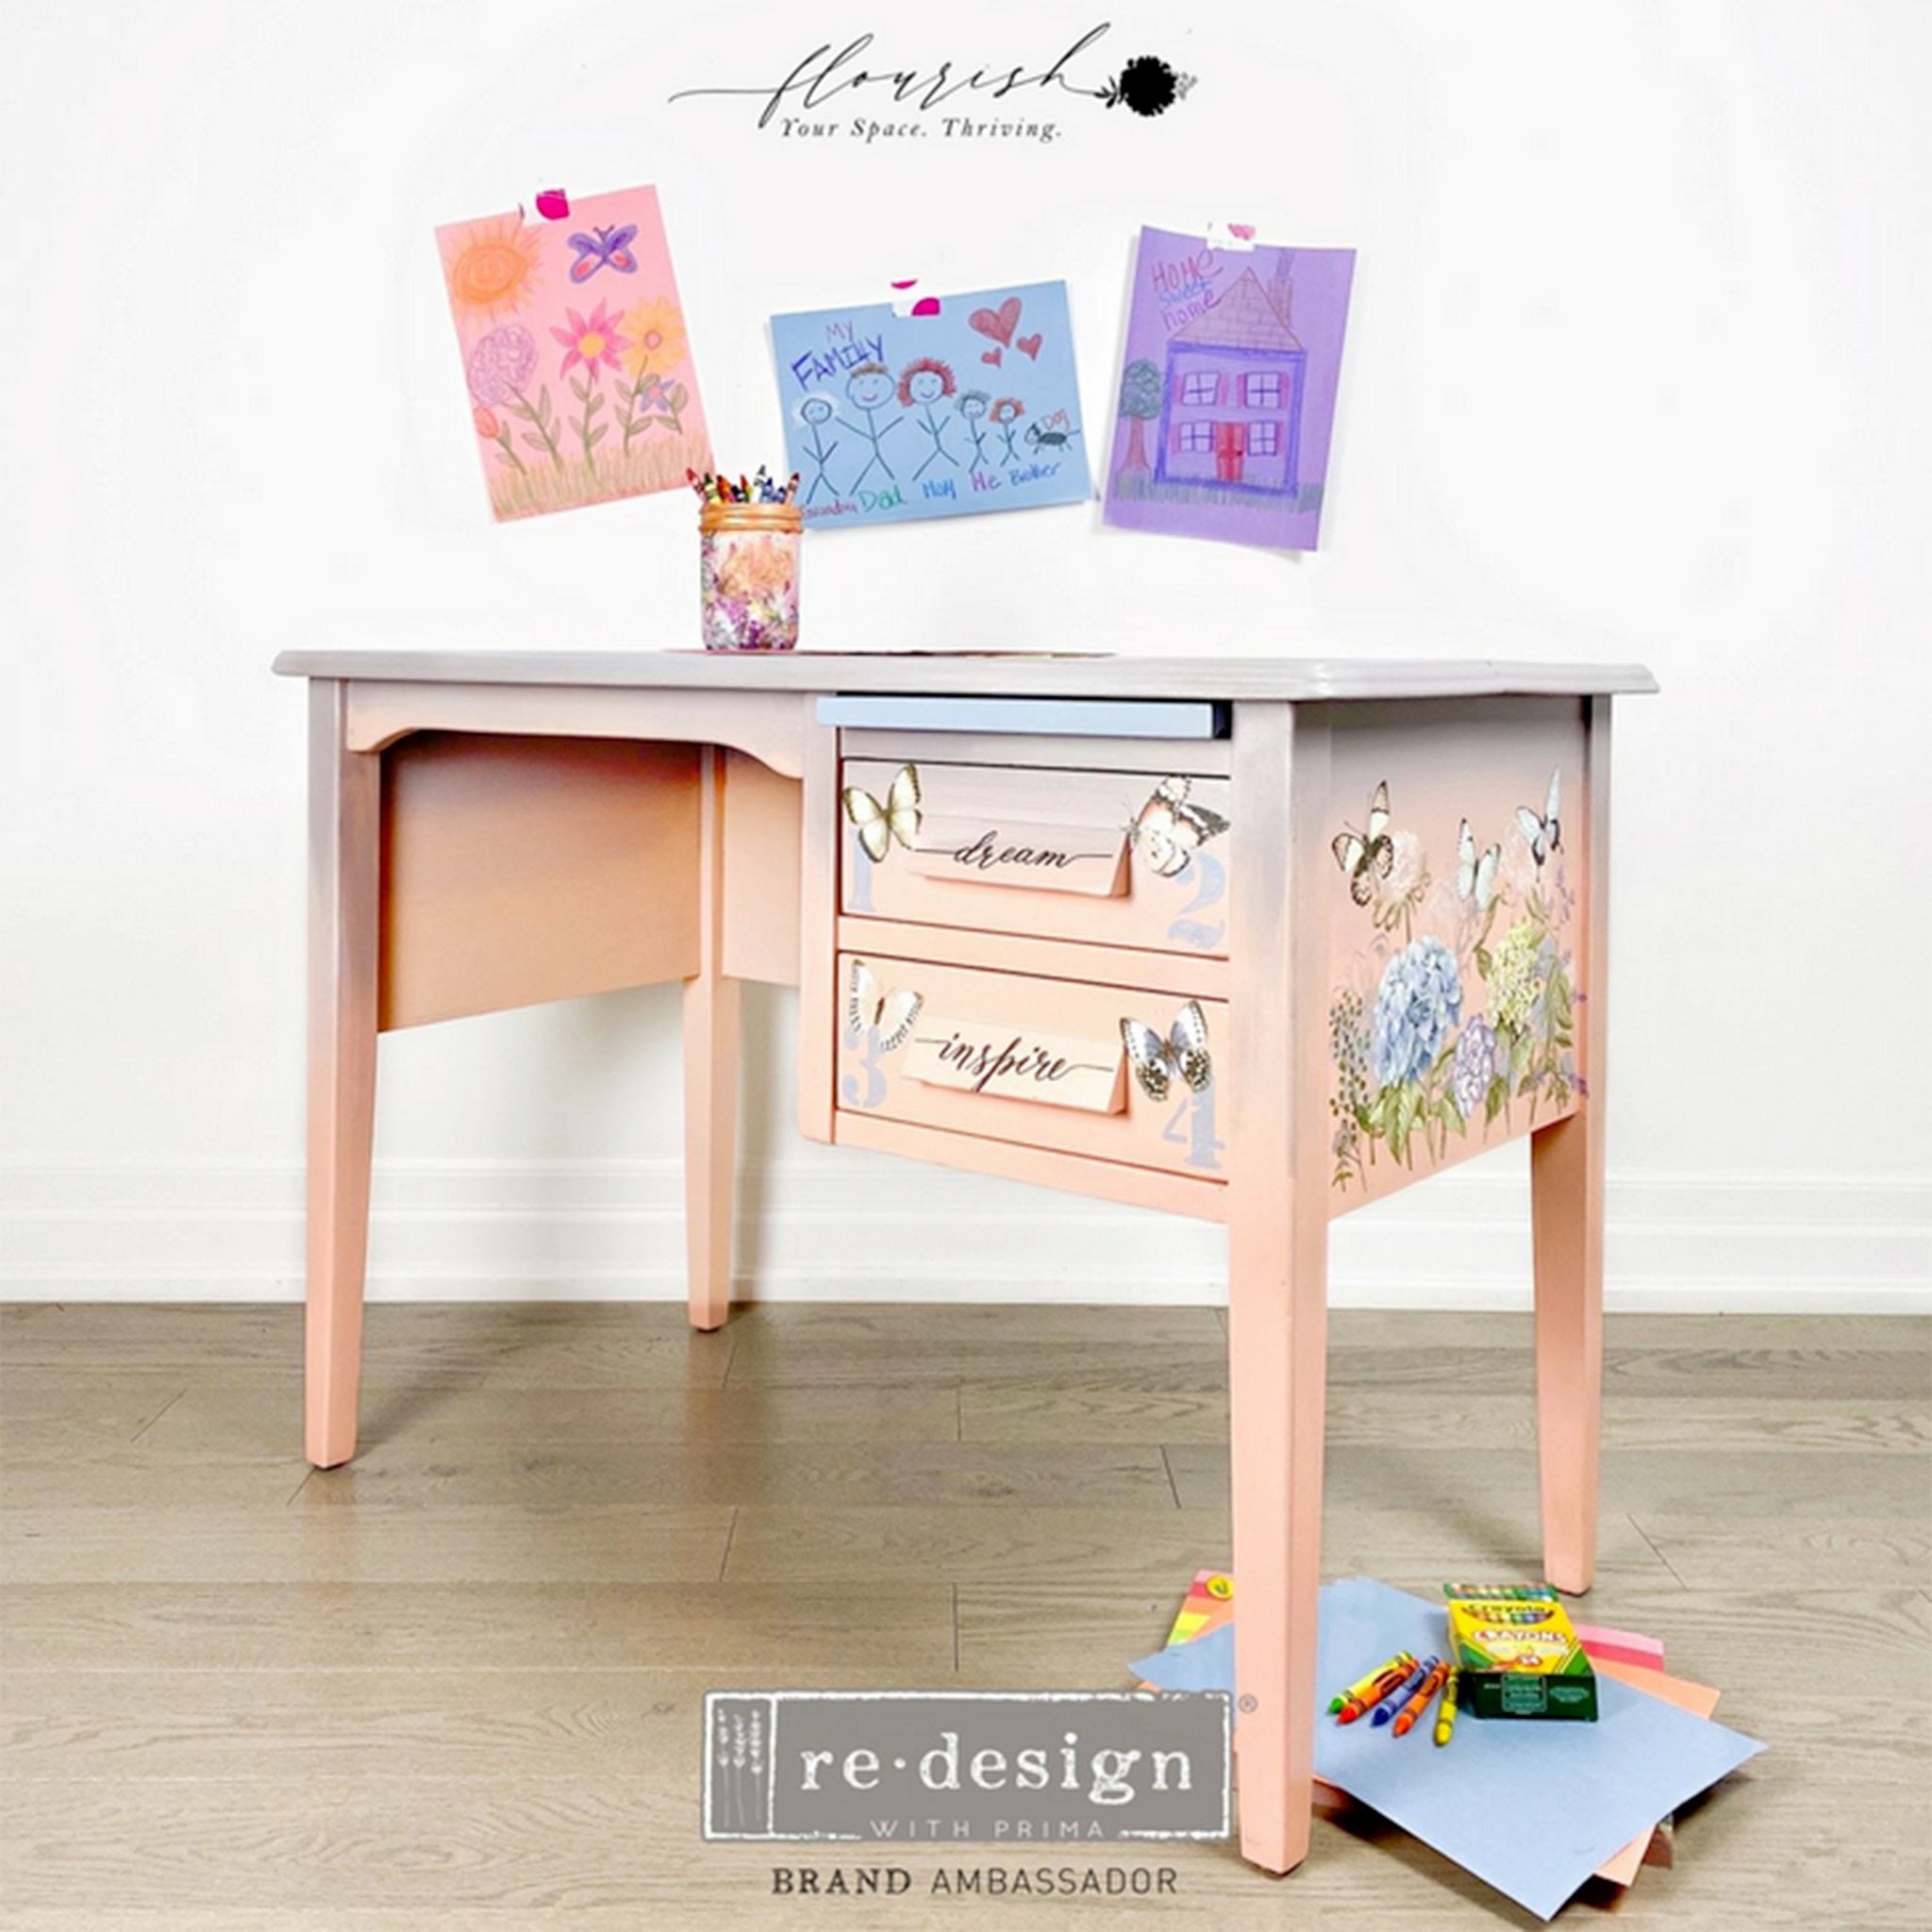 A kid desk refurbished by Flourish You Space Thriving is painted light peach and features ReDesign with Prima's Papillon Collection small transfer on it.